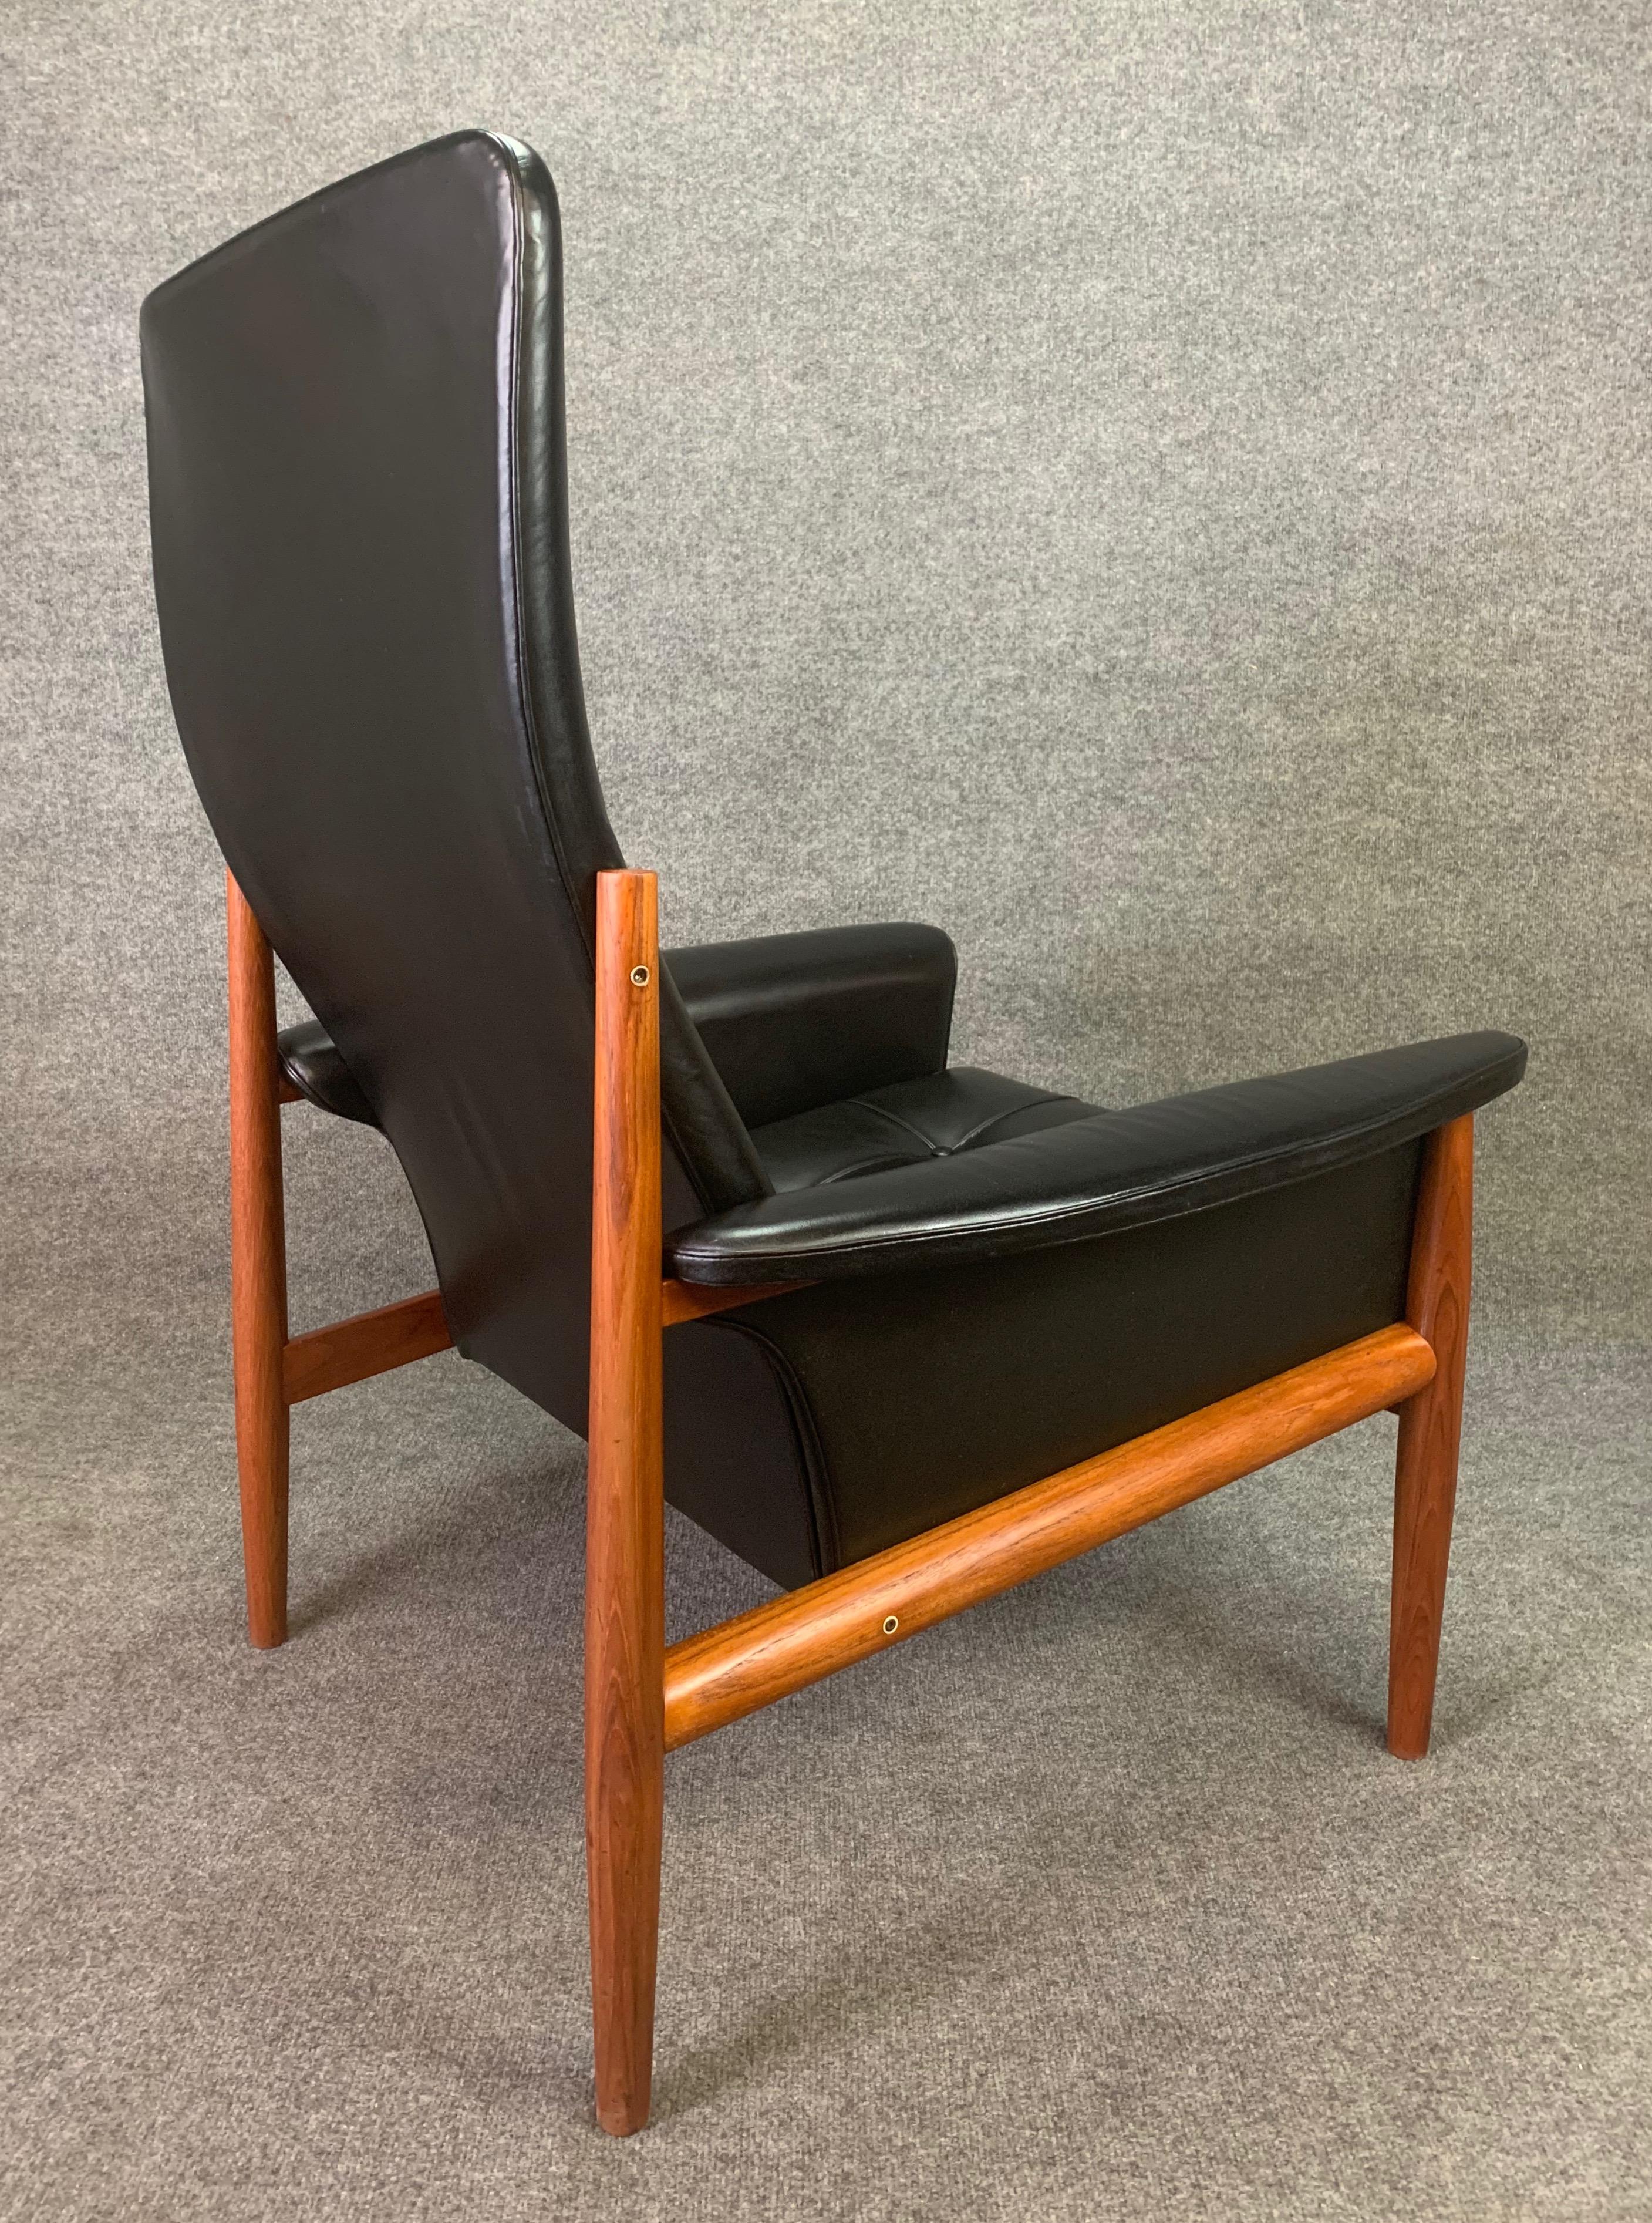 Vintage Danish Midcentury Teak and Leather Lounge Chair by Grete Jalk In Good Condition For Sale In San Marcos, CA